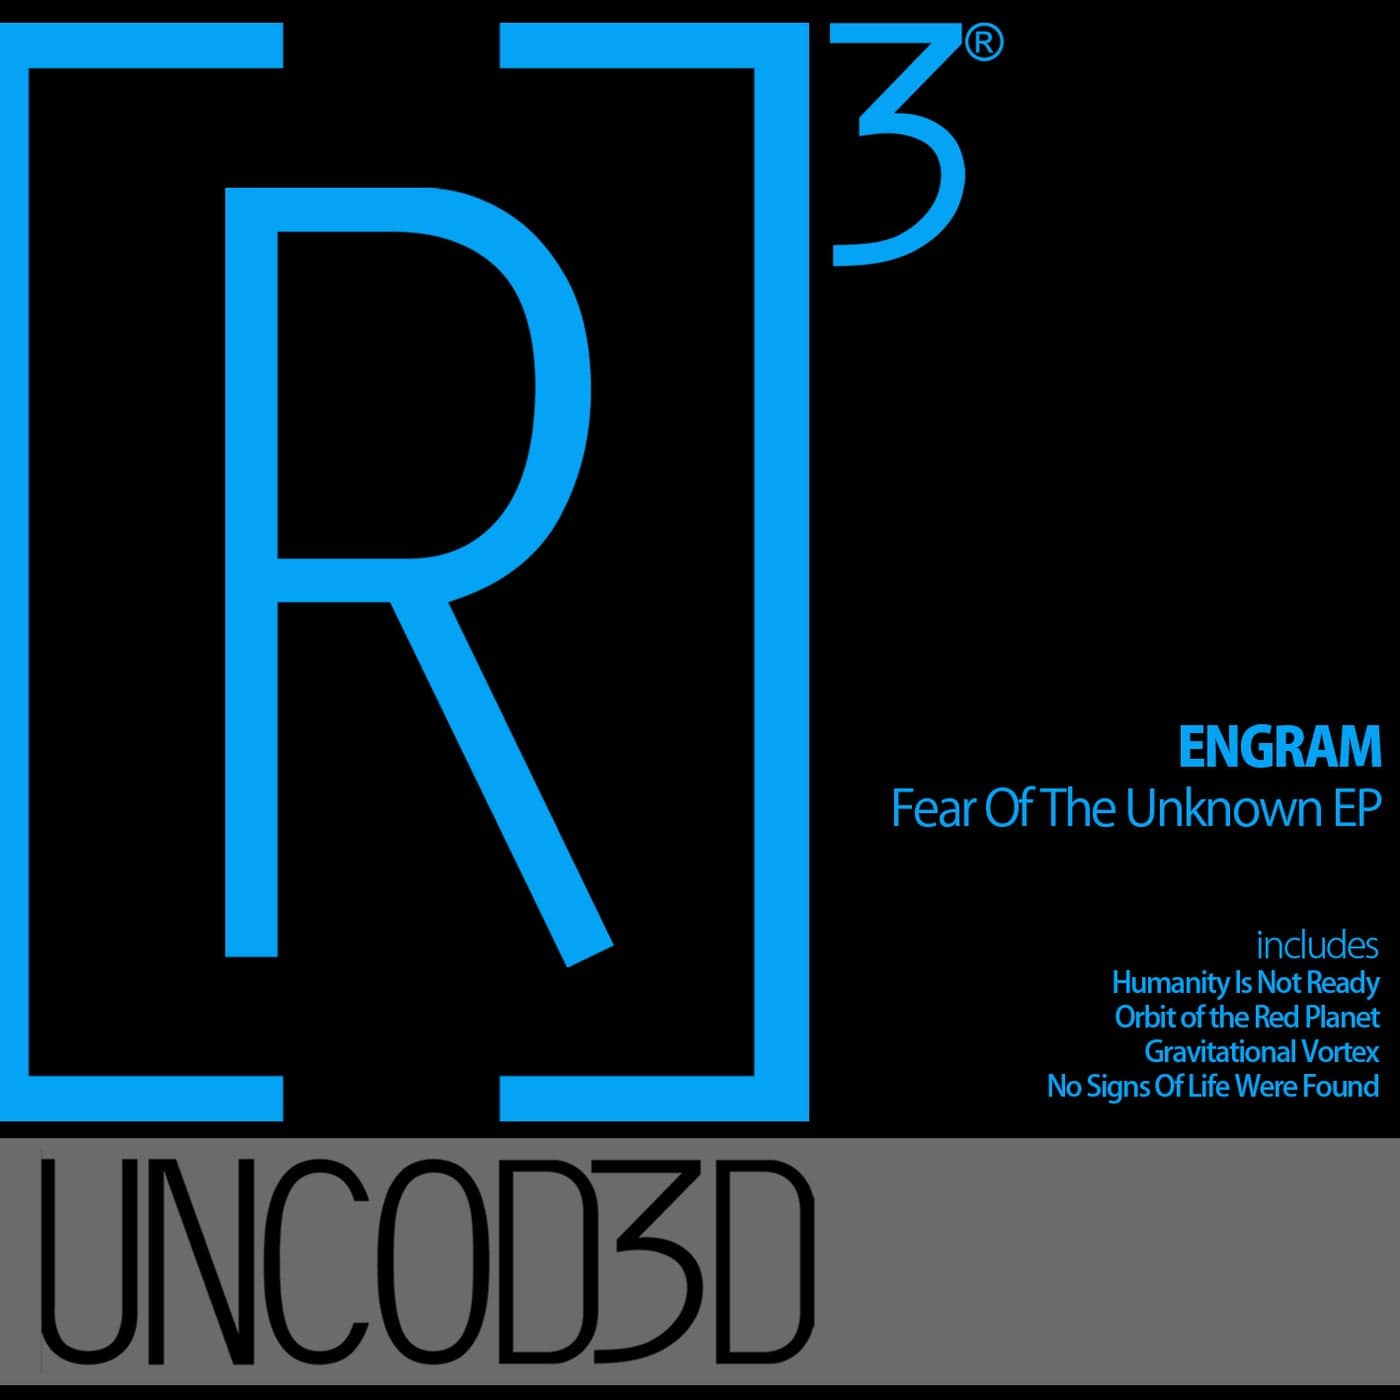 Download Engram - Fear of the Unknown EP on Electrobuzz